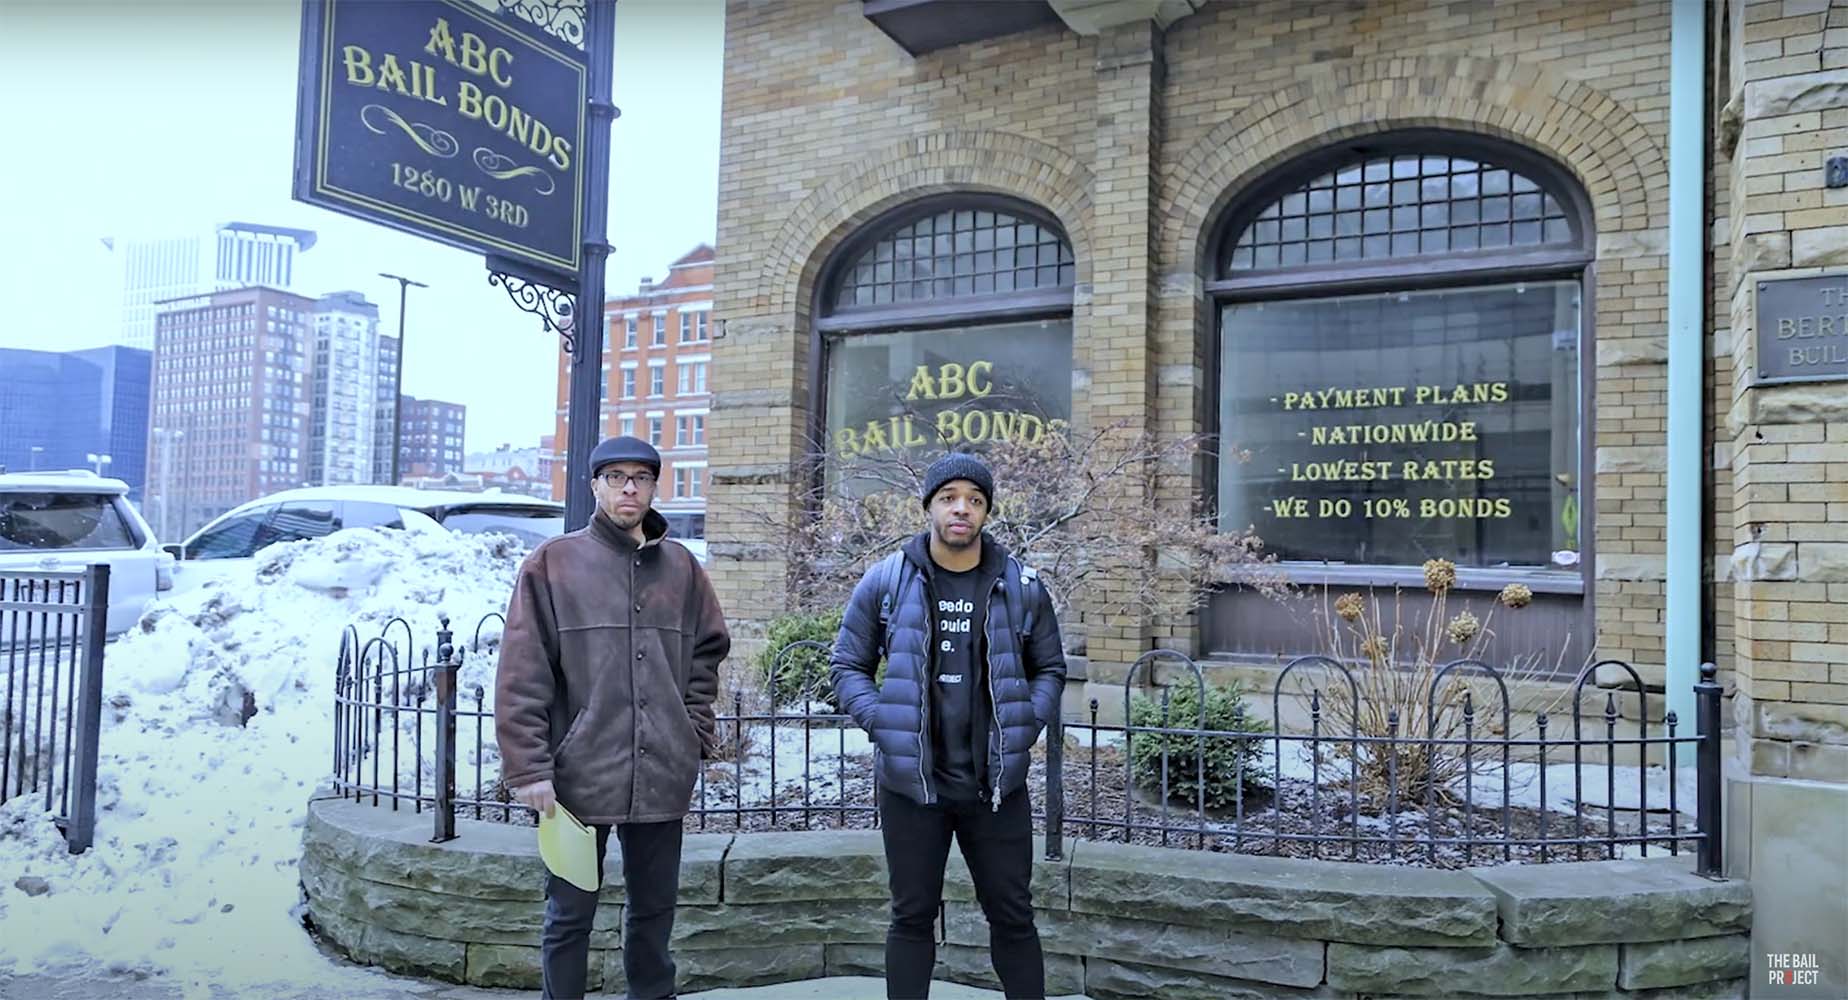 Two individuals standing in front of "ABC Bail Bonds"